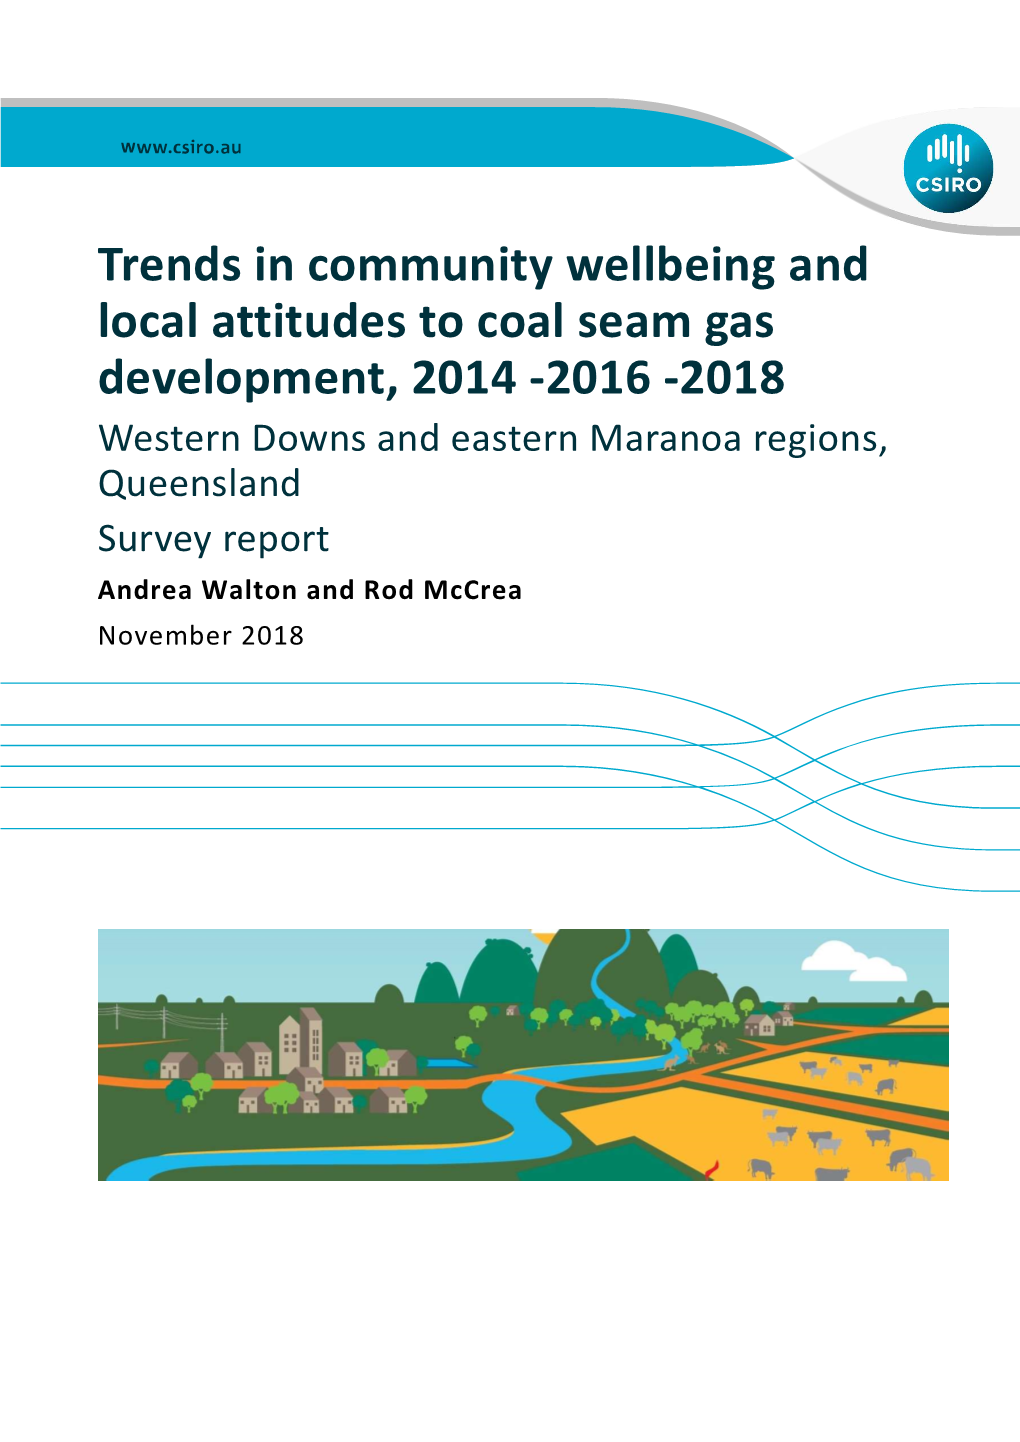 Trends in Community Wellbeing and Local Attitudes to Coal Seam Gas Development, 2014- 2016- 2018